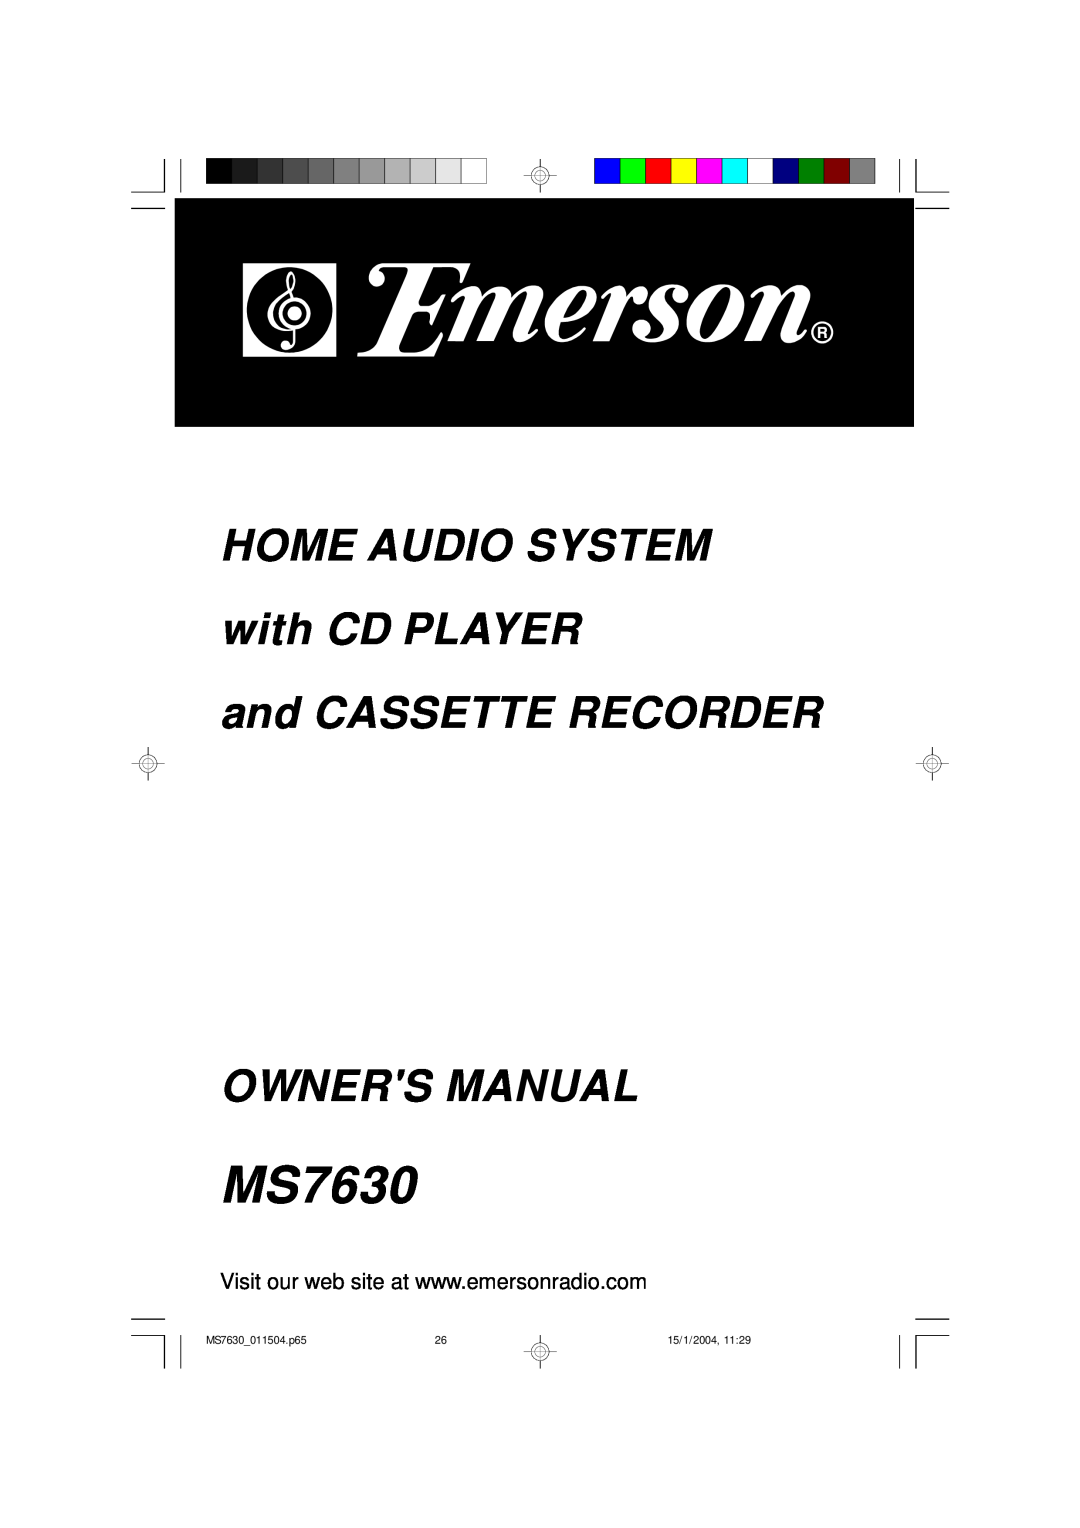 Emerson owner manual HOME AUDIO SYSTEM with CD PLAYER, MS7630 011504.p65, 15/1/2004 